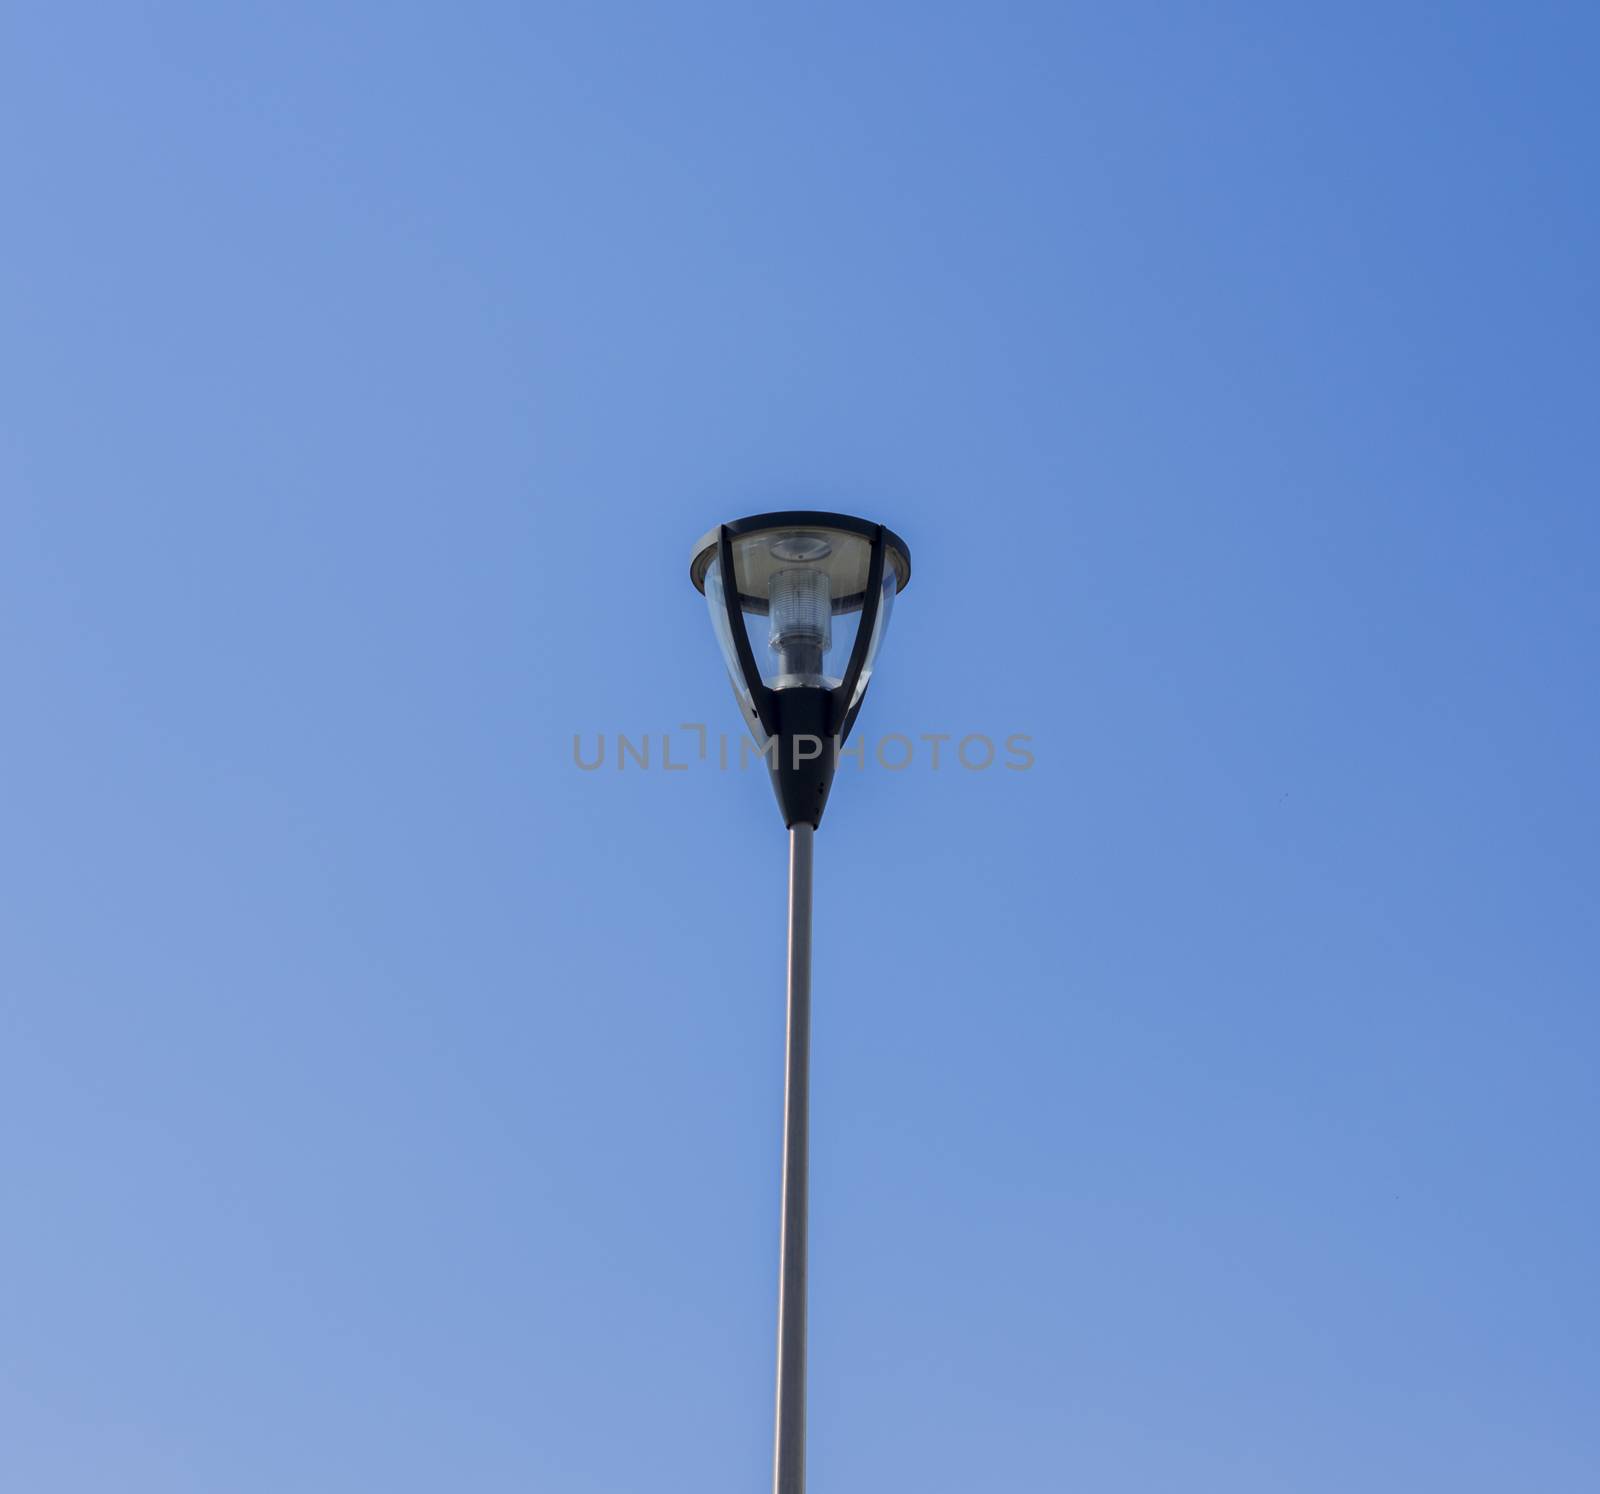 street lamp on blue sky background . For your commercial and editorial use